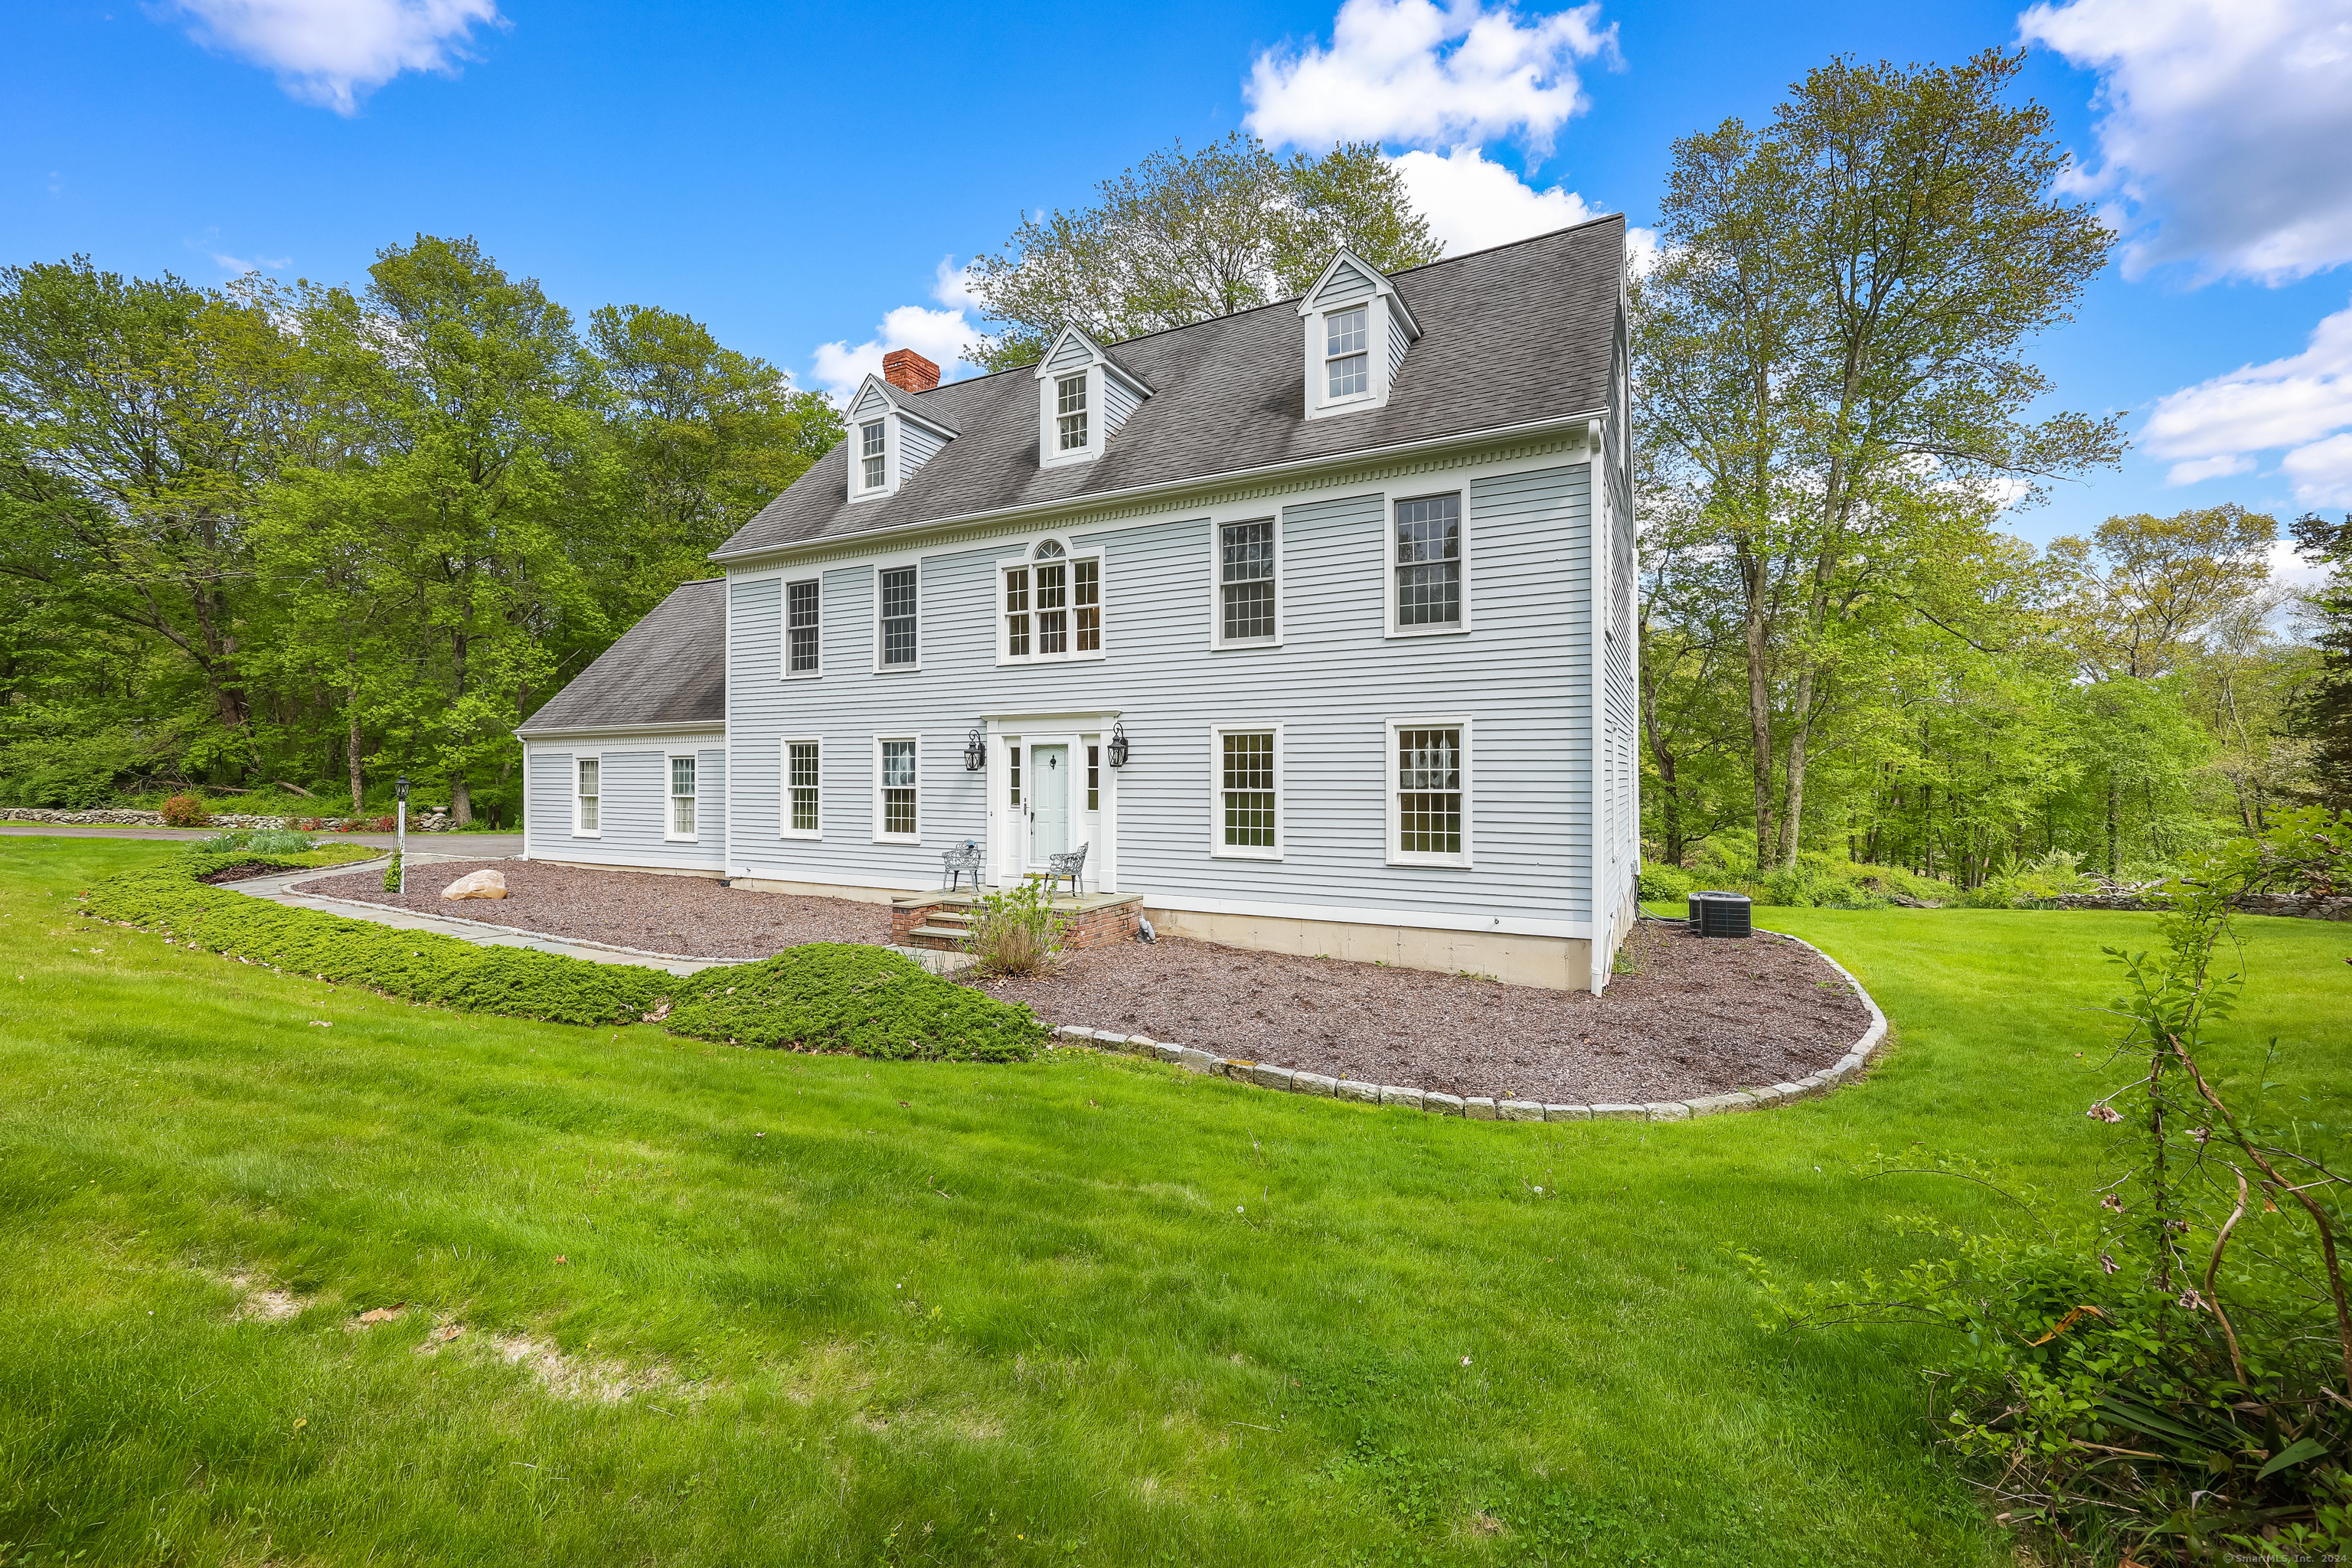 99 Old Woodbury Road, Southbury, Connecticut - 4 Bedrooms  
3 Bathrooms  
8 Rooms - 